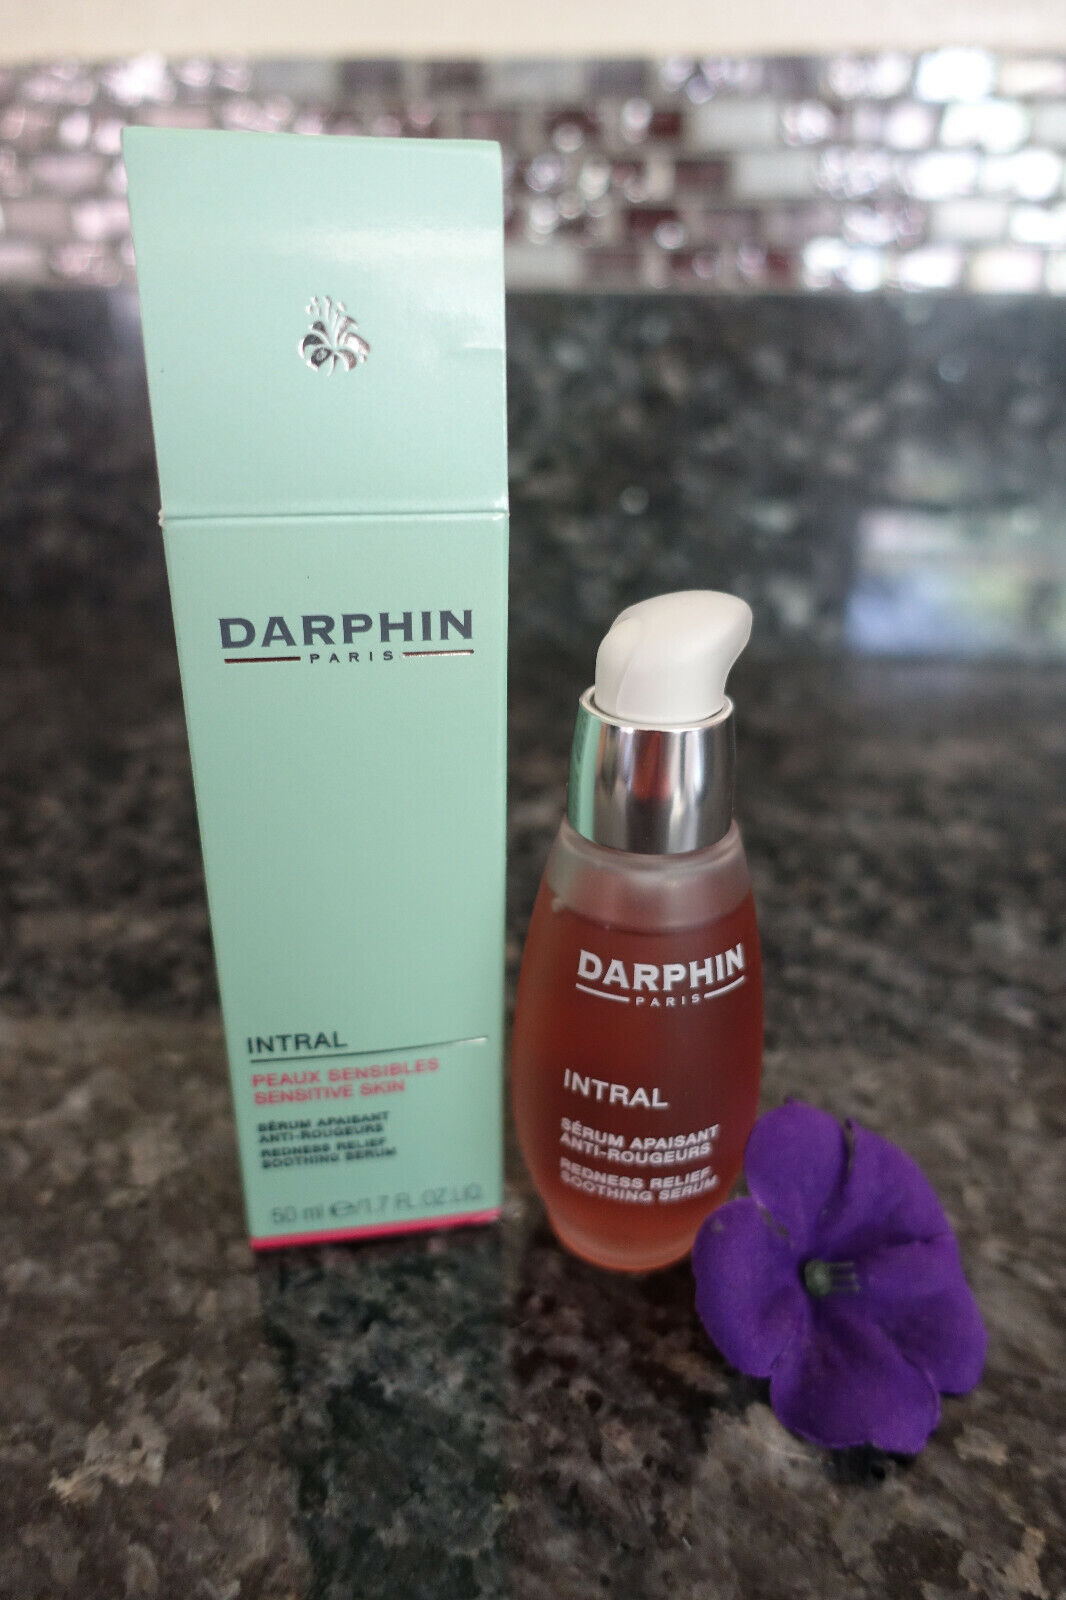 Darphin intral redness relief soothing serum new in box 1.7oz Tania, dobra cena